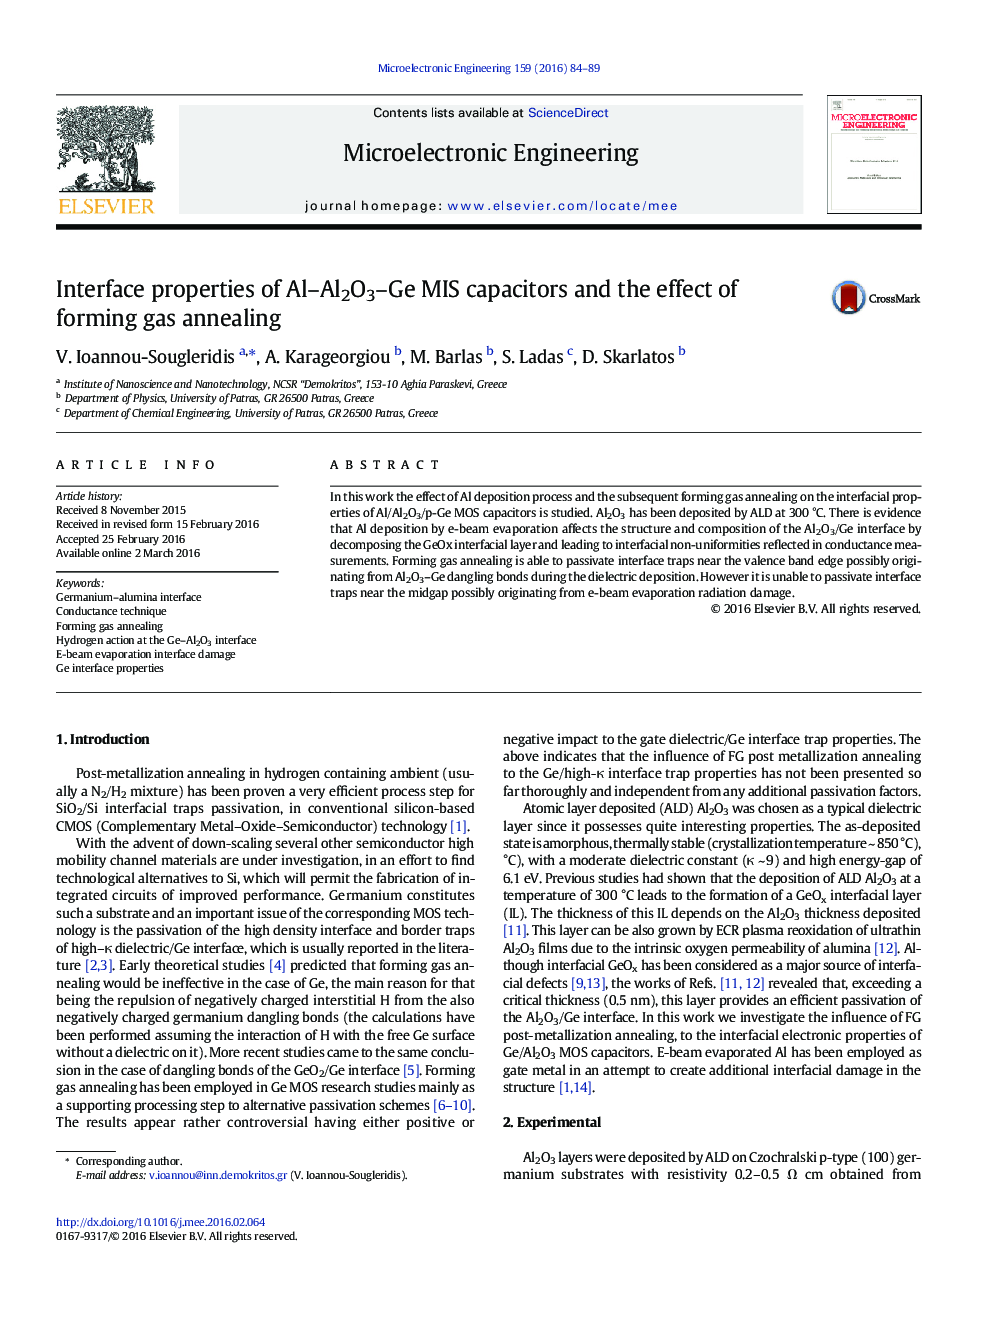 Interface properties of Al–Al2O3–Ge MIS capacitors and the effect of forming gas annealing